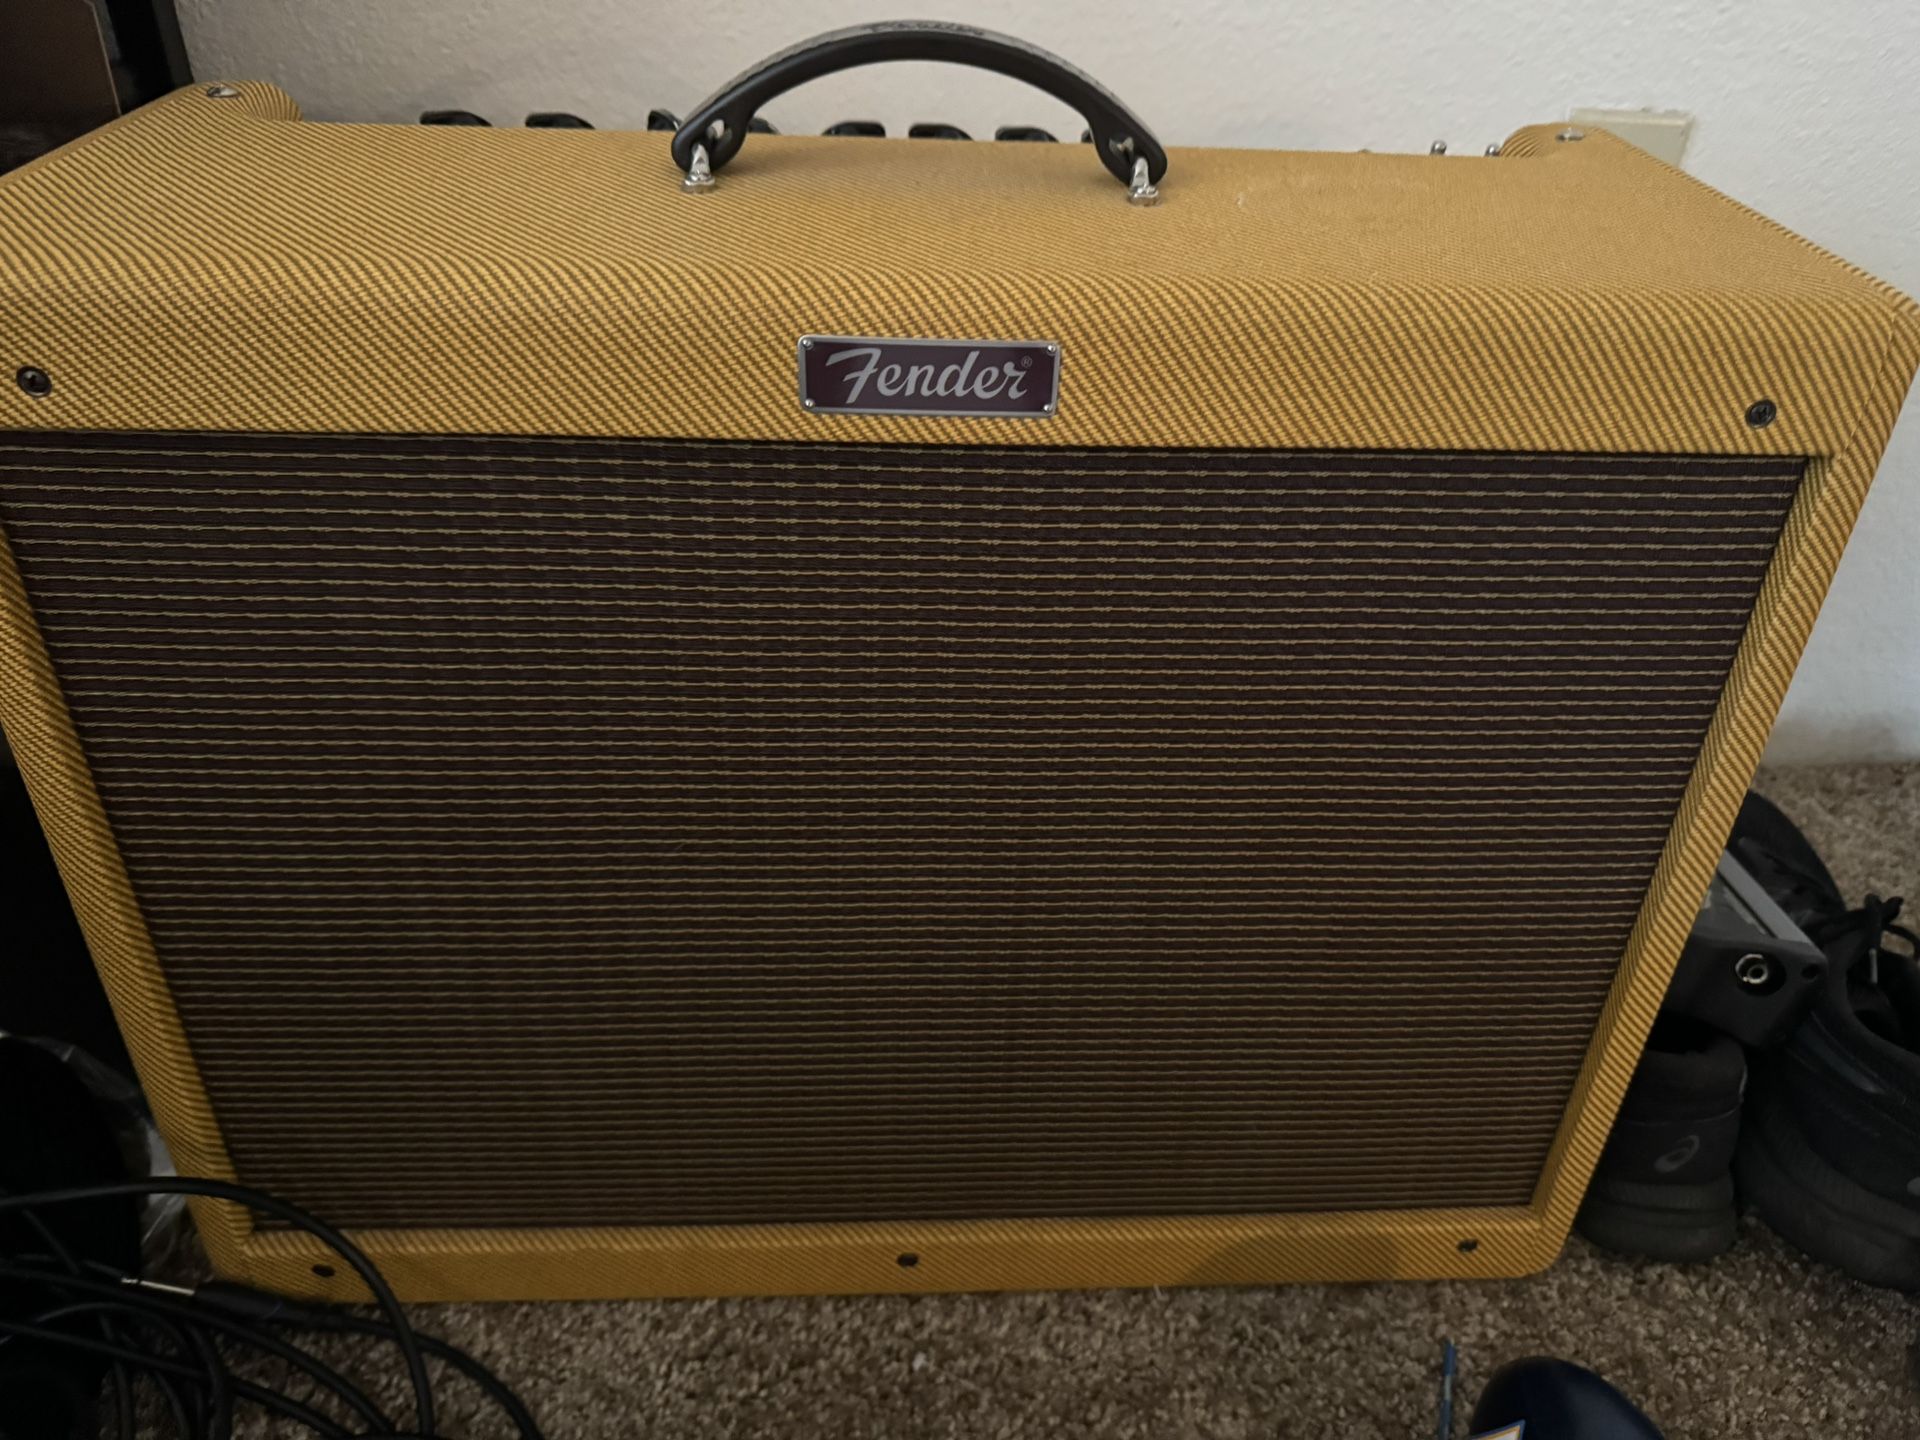 Fender Re-issue Blues Deluxe!